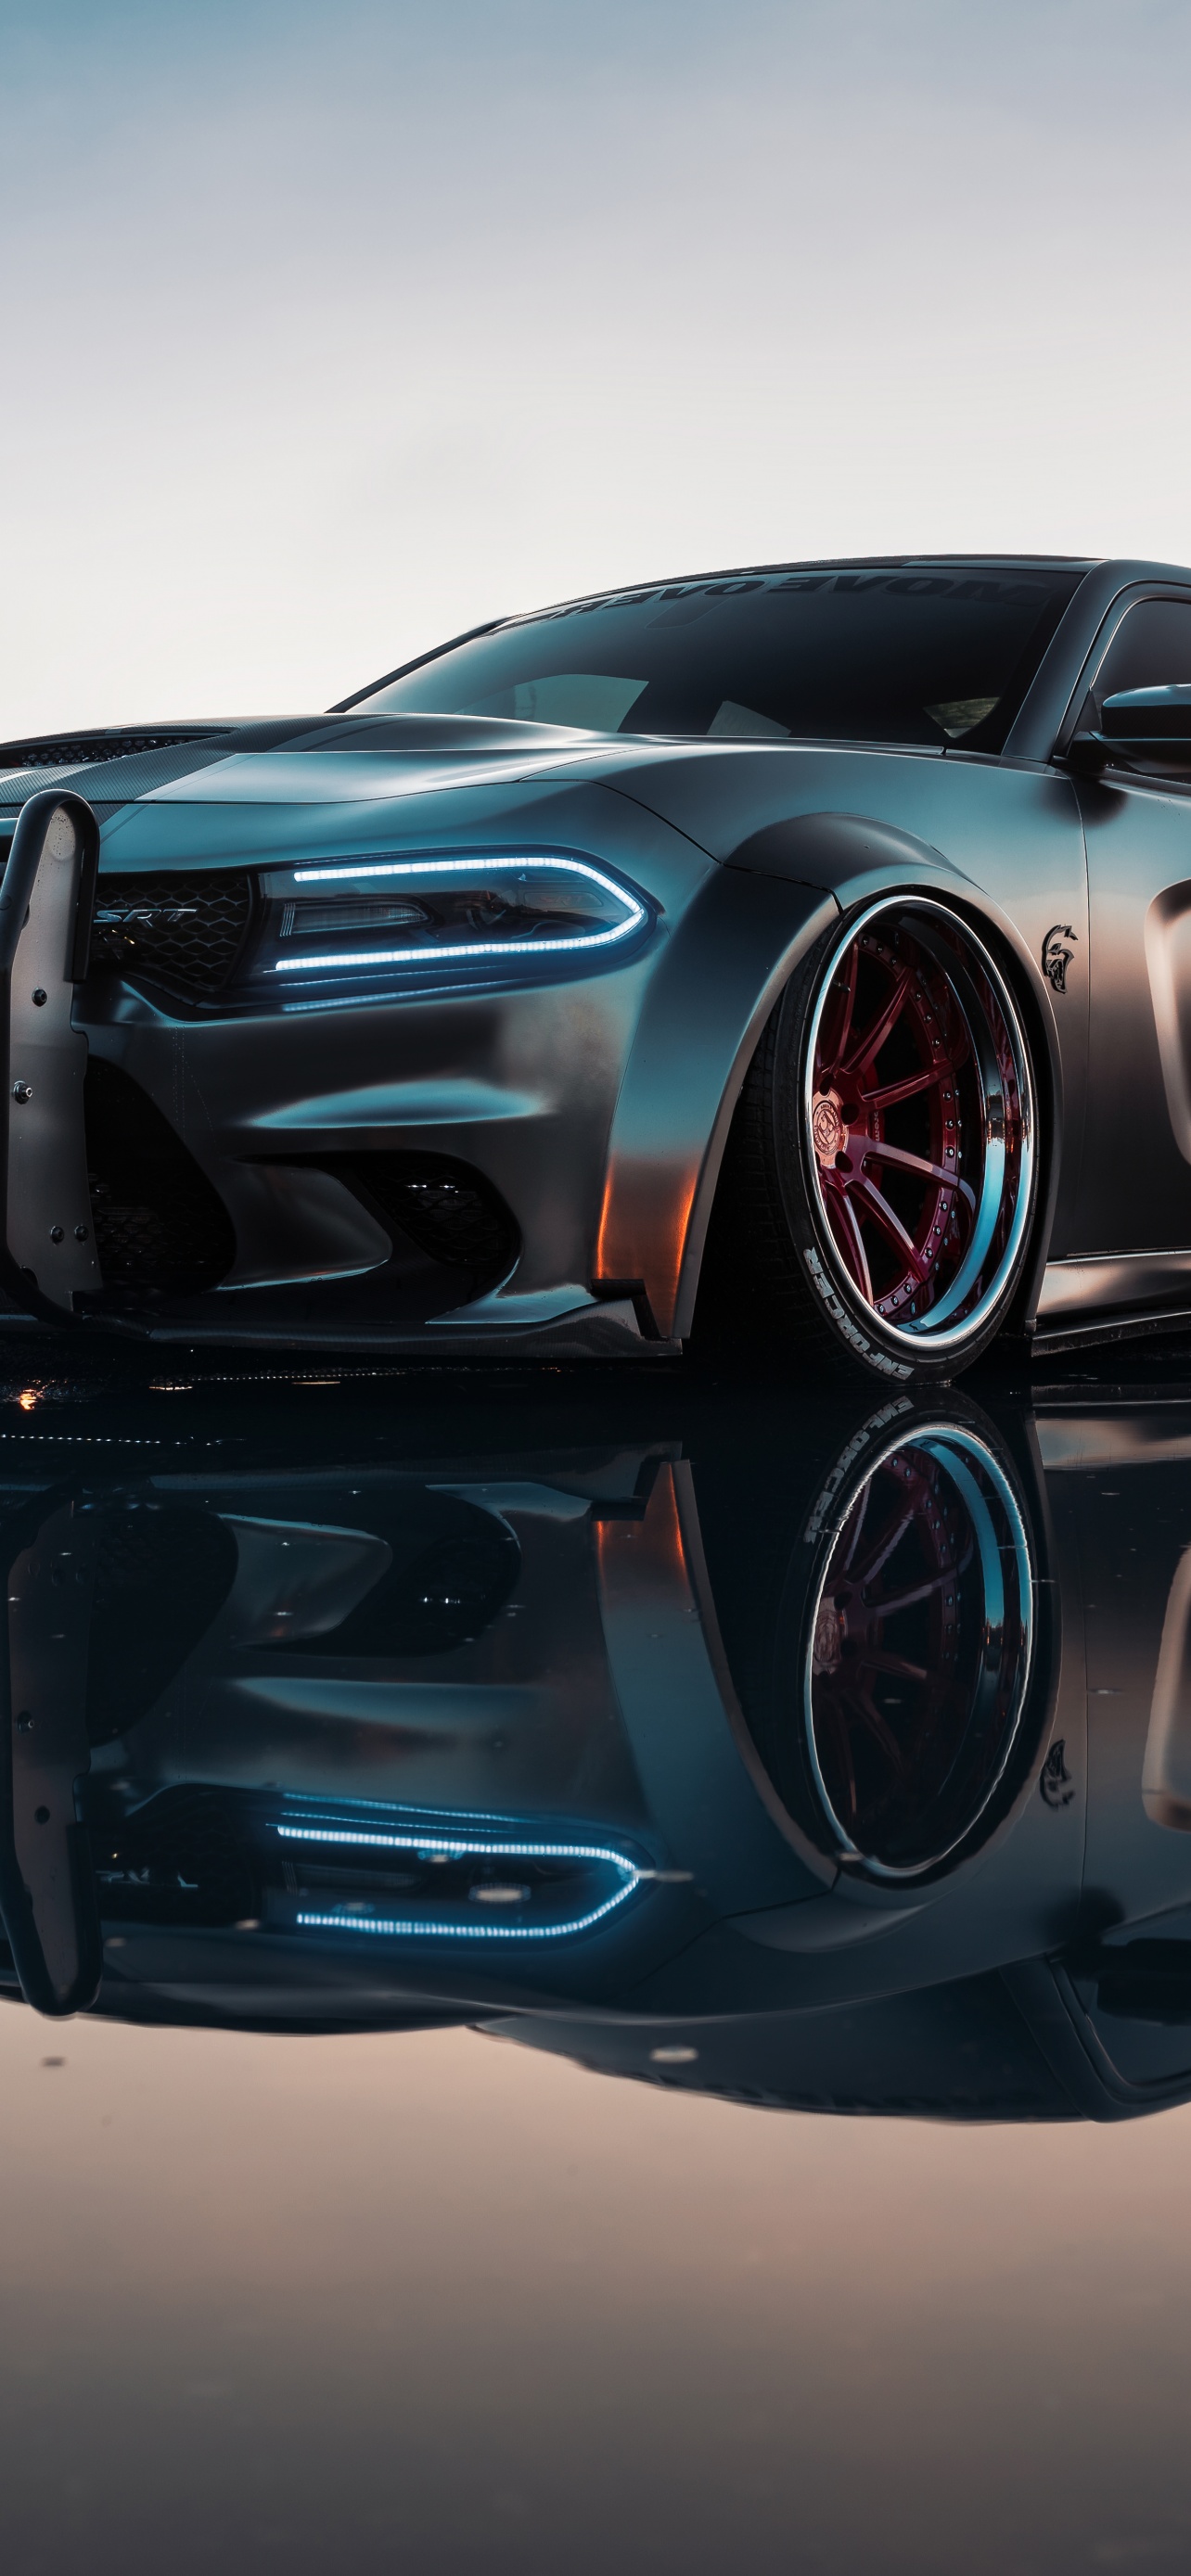 Download wallpaper 1350x2400 dodge charger car rear view black iphone  876s6 for parallax hd background